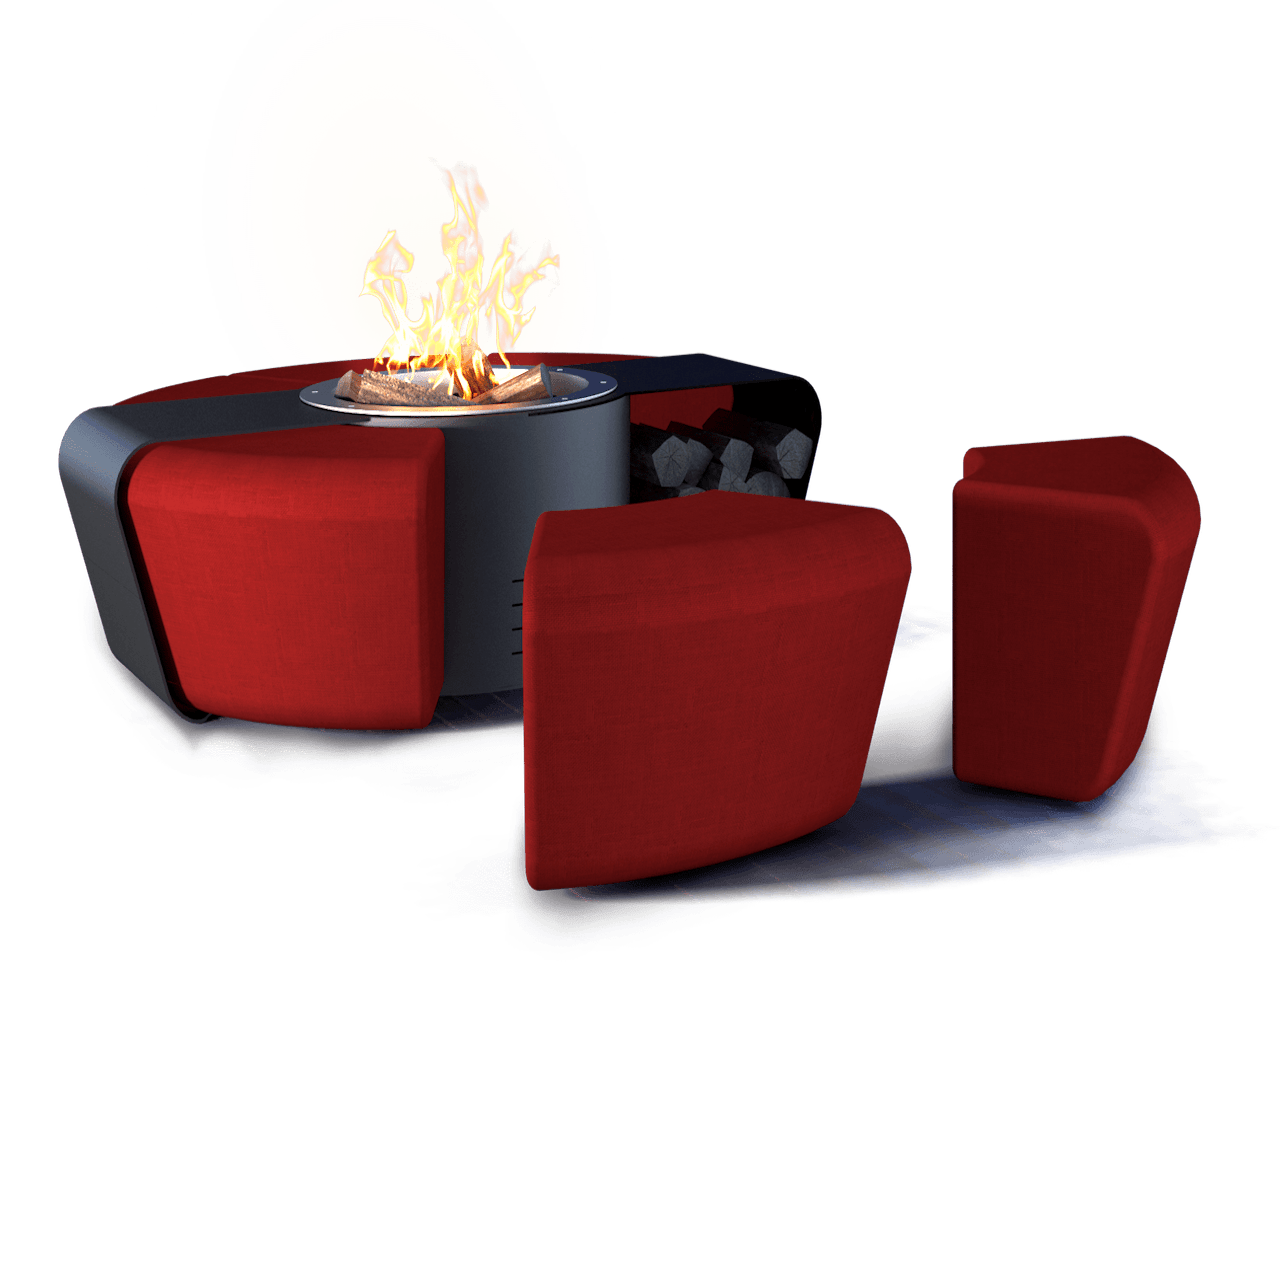 Circus Fire Pit